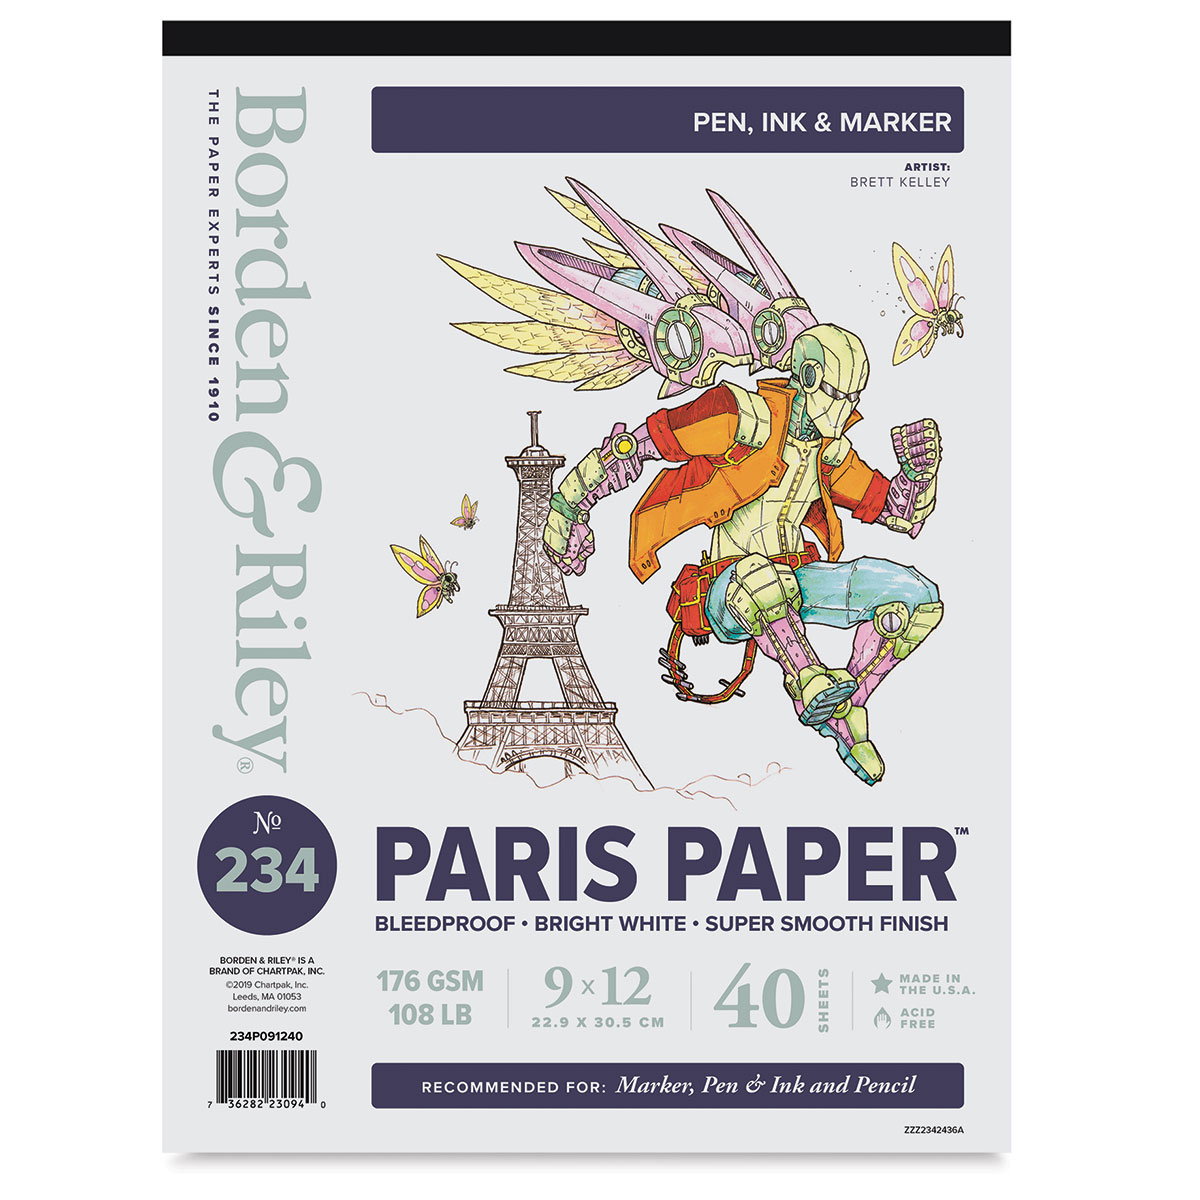 Borden & Riley 234 Paris Paper for Pens Hard Cover Sketch Book 9 in. x 12 in. 40 Sheets